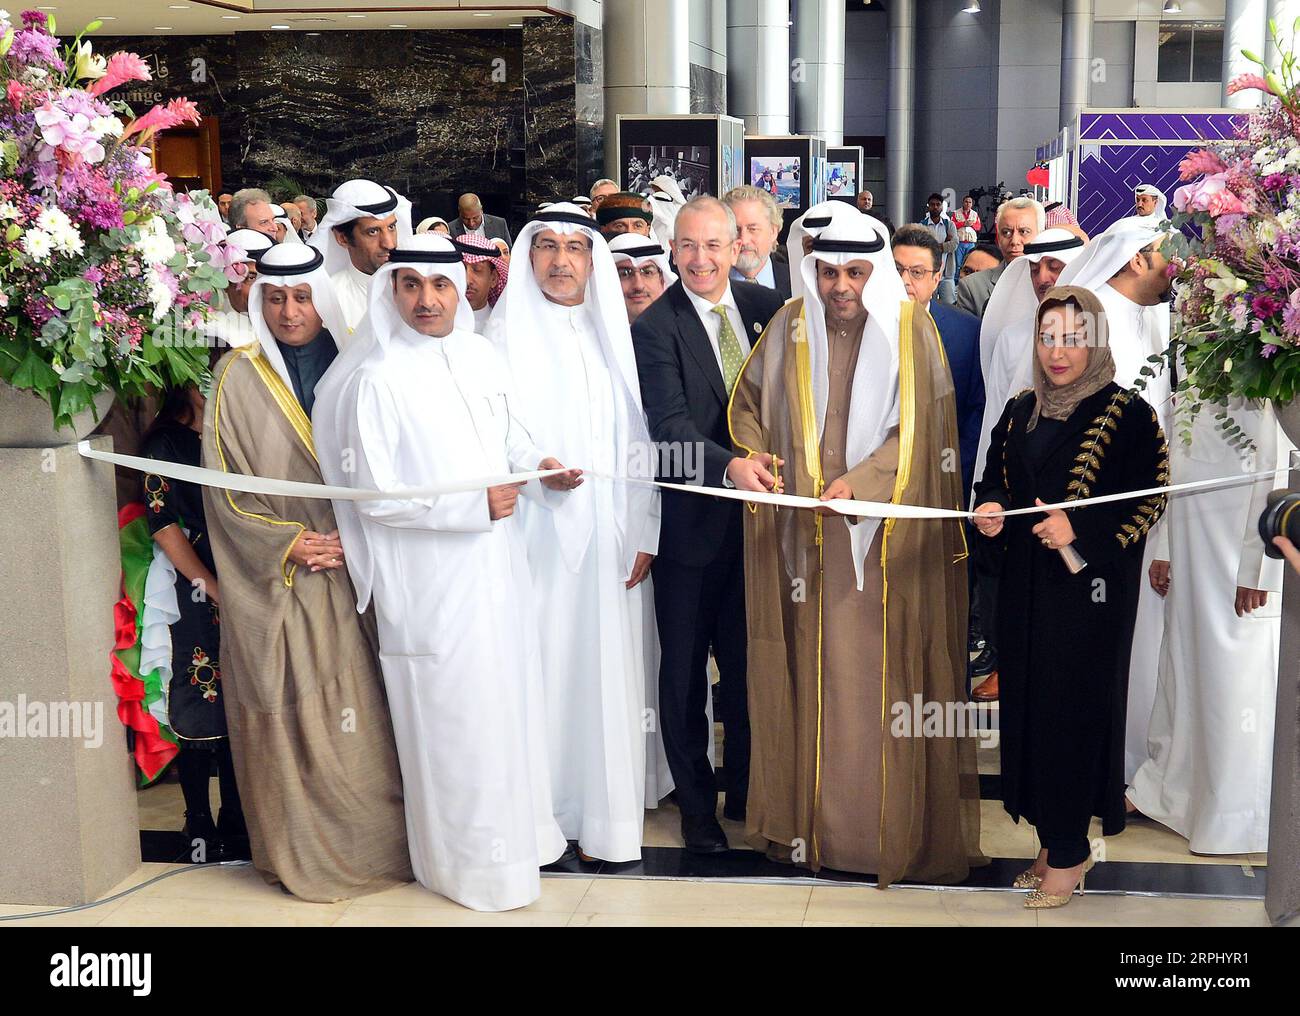 191120 -- HAWALLI GOVERNORATE, Nov. 20, 2019 Xinhua -- Mohammad Al-Jabri 2nd R, Front, Kuwaiti Minister of Information and Minister of State for Youth Affairs, cuts the ribbon during the opening ceremony of the 44th Kuwait International Book Fair in Hawalli Governorate, Kuwait, on Nov. 20, 2019. The 44th Kuwait International Book Fair kicked off on Wednesday at the Kuwait International Fairground. Three Chinese publishing houses participated in the book fair. Photo by Asad/Xinhua KUWAIT-HAWALLI GOVERNORATE-INTERNATIONAL BOOK FAIR PUBLICATIONxNOTxINxCHN Stock Photo